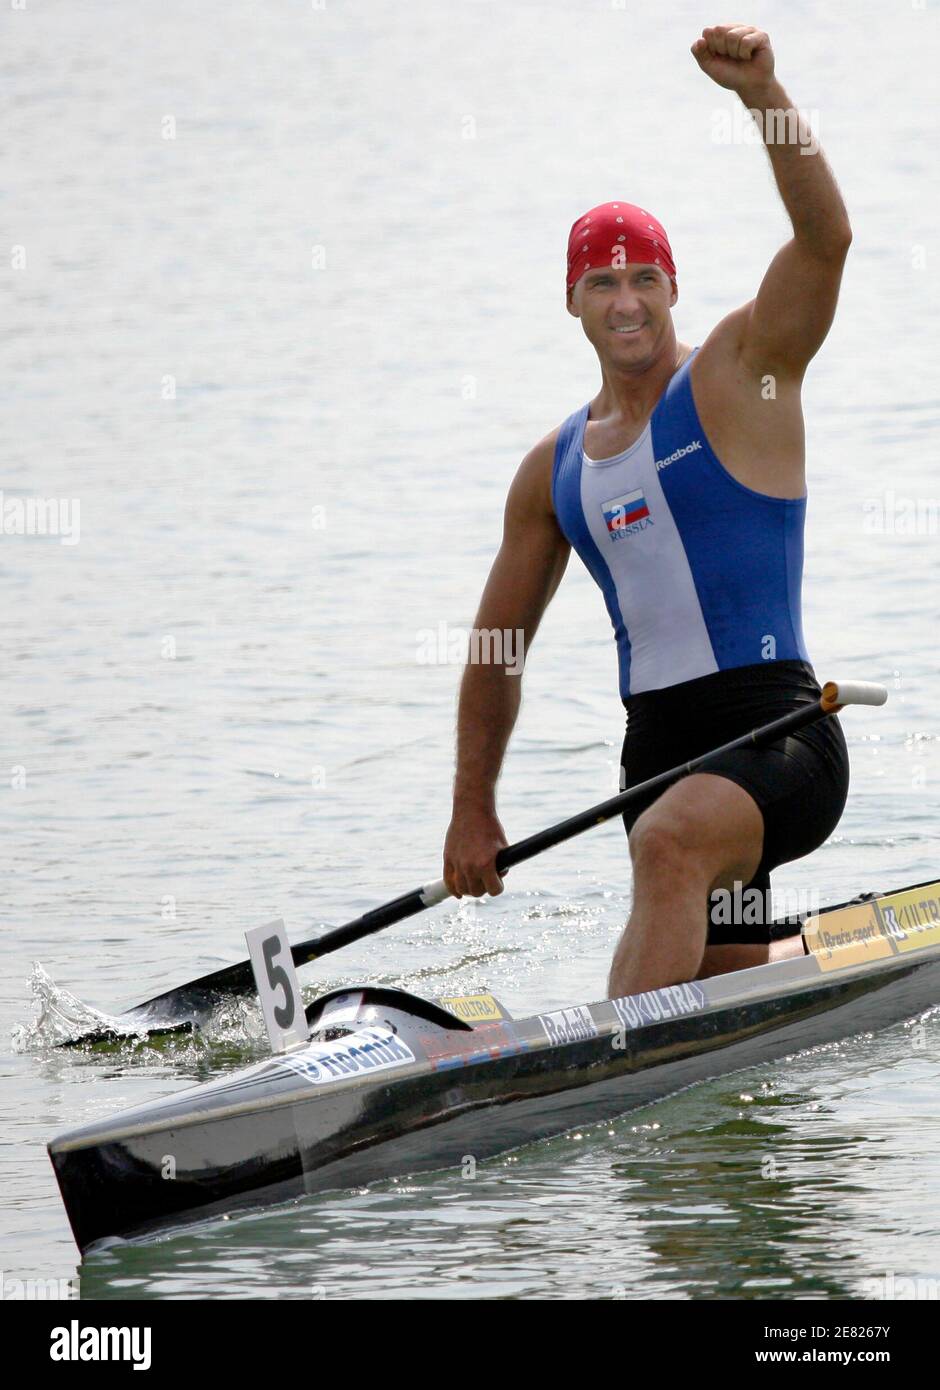 Maxim Opalev of Russia celebrates his victory in the C1 Men 500m race at the European Flatwater Championships in the central Bohemian village of Racice, Czech Republic, July 9, 2006.   REUTERS/Petr Josek   (Czech Republic) Stock Photo